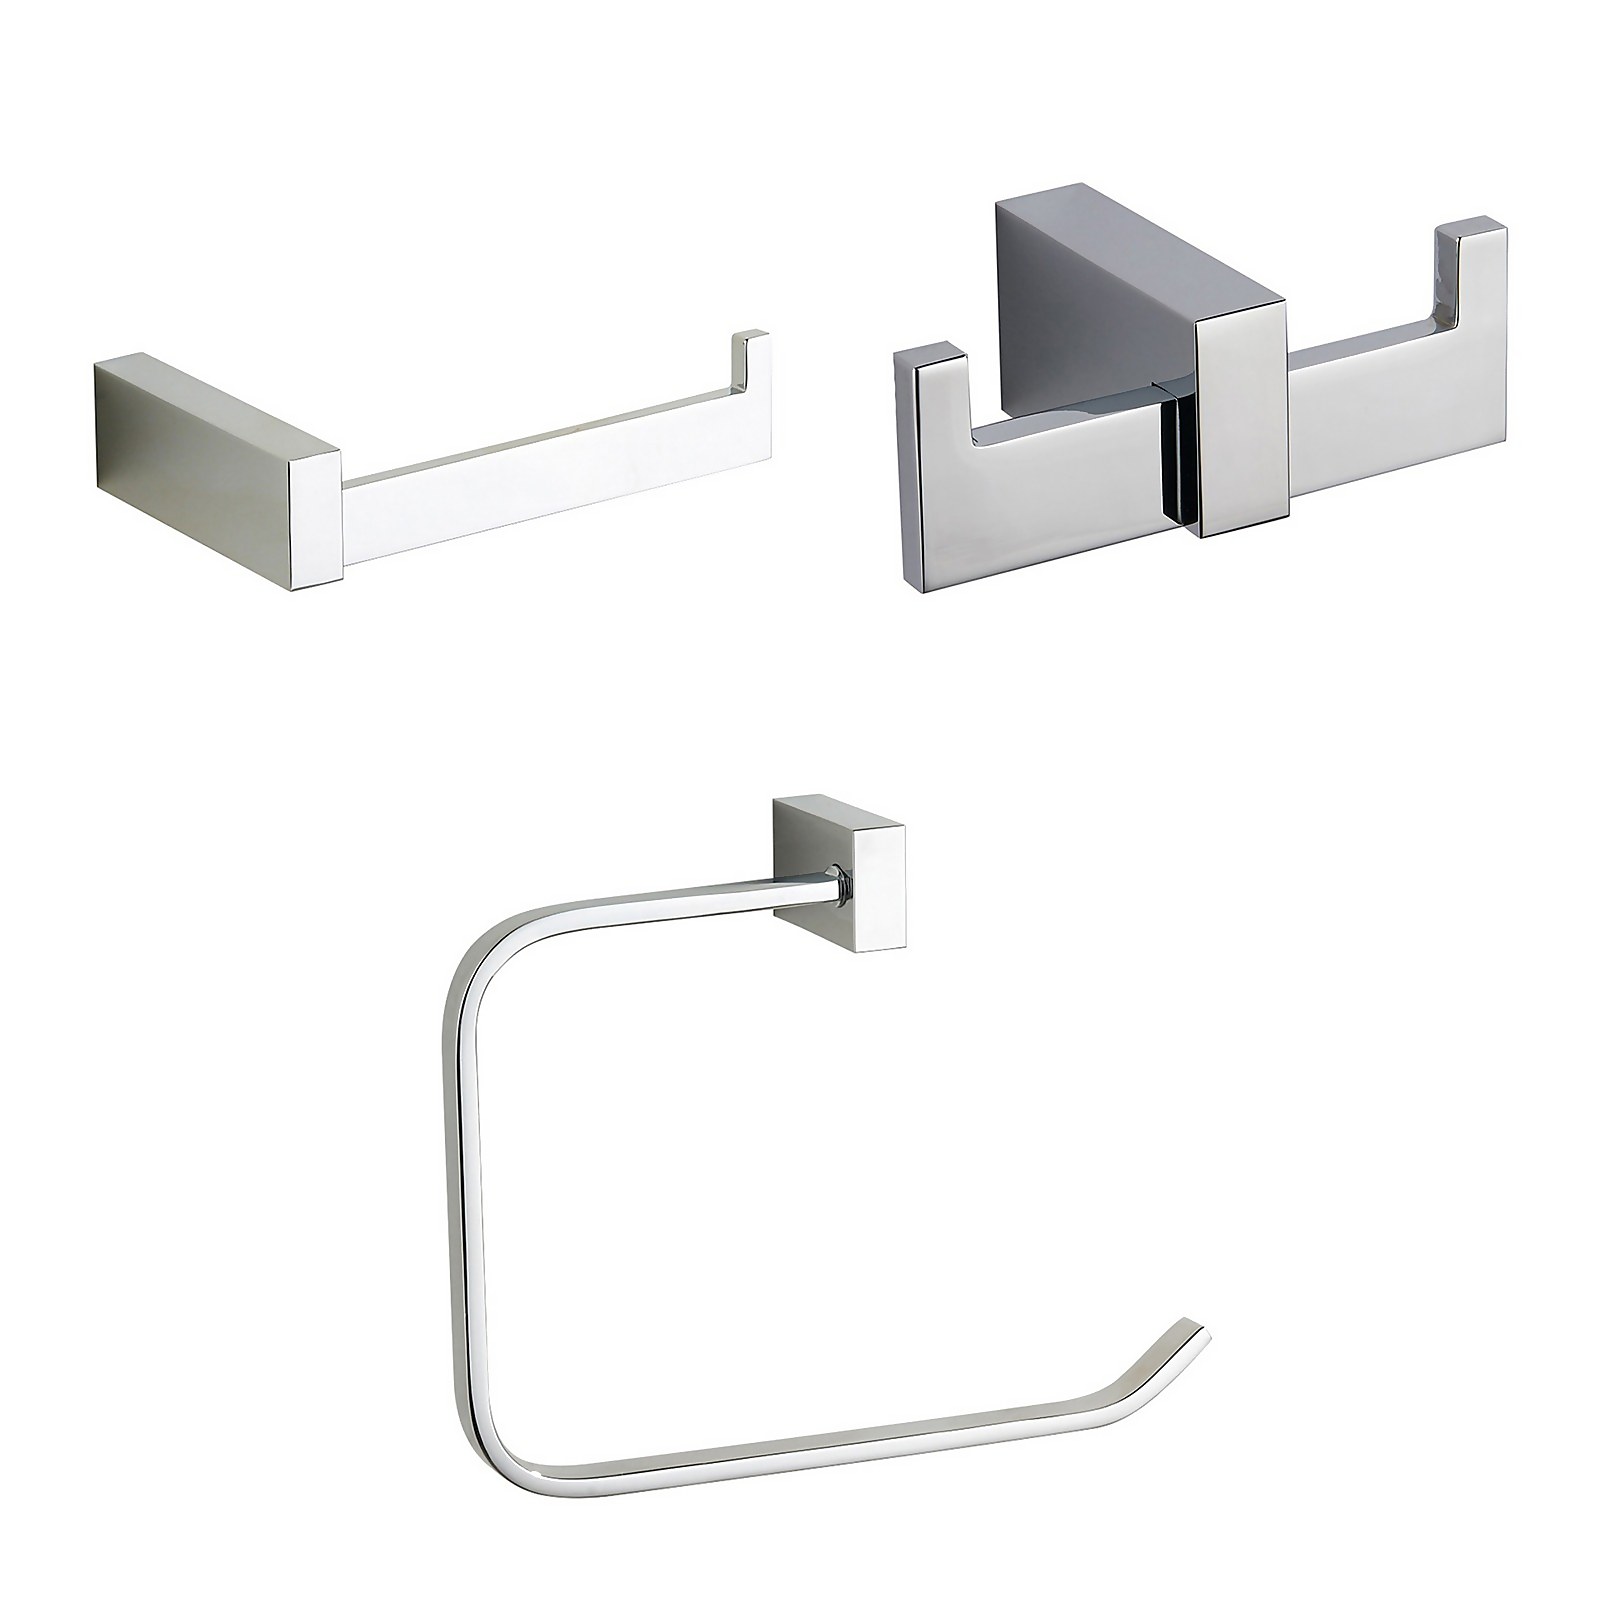 Photo of Square 3 Piece Wall Mounted Bathroom Accessories Set